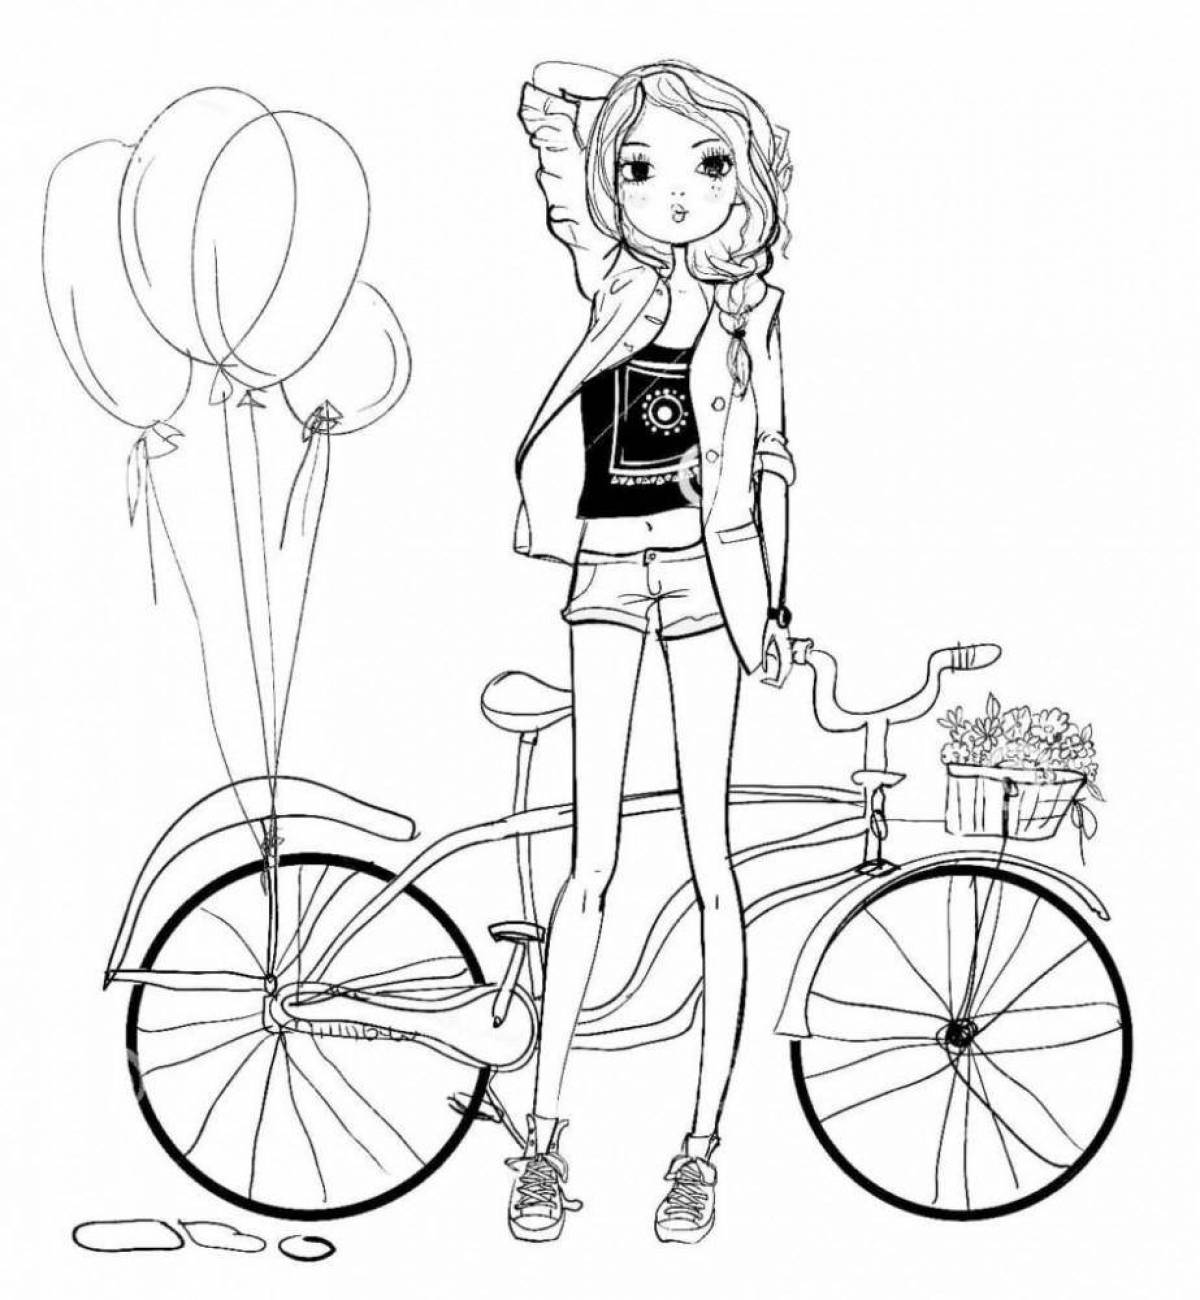 A cheerful girl on a bicycle